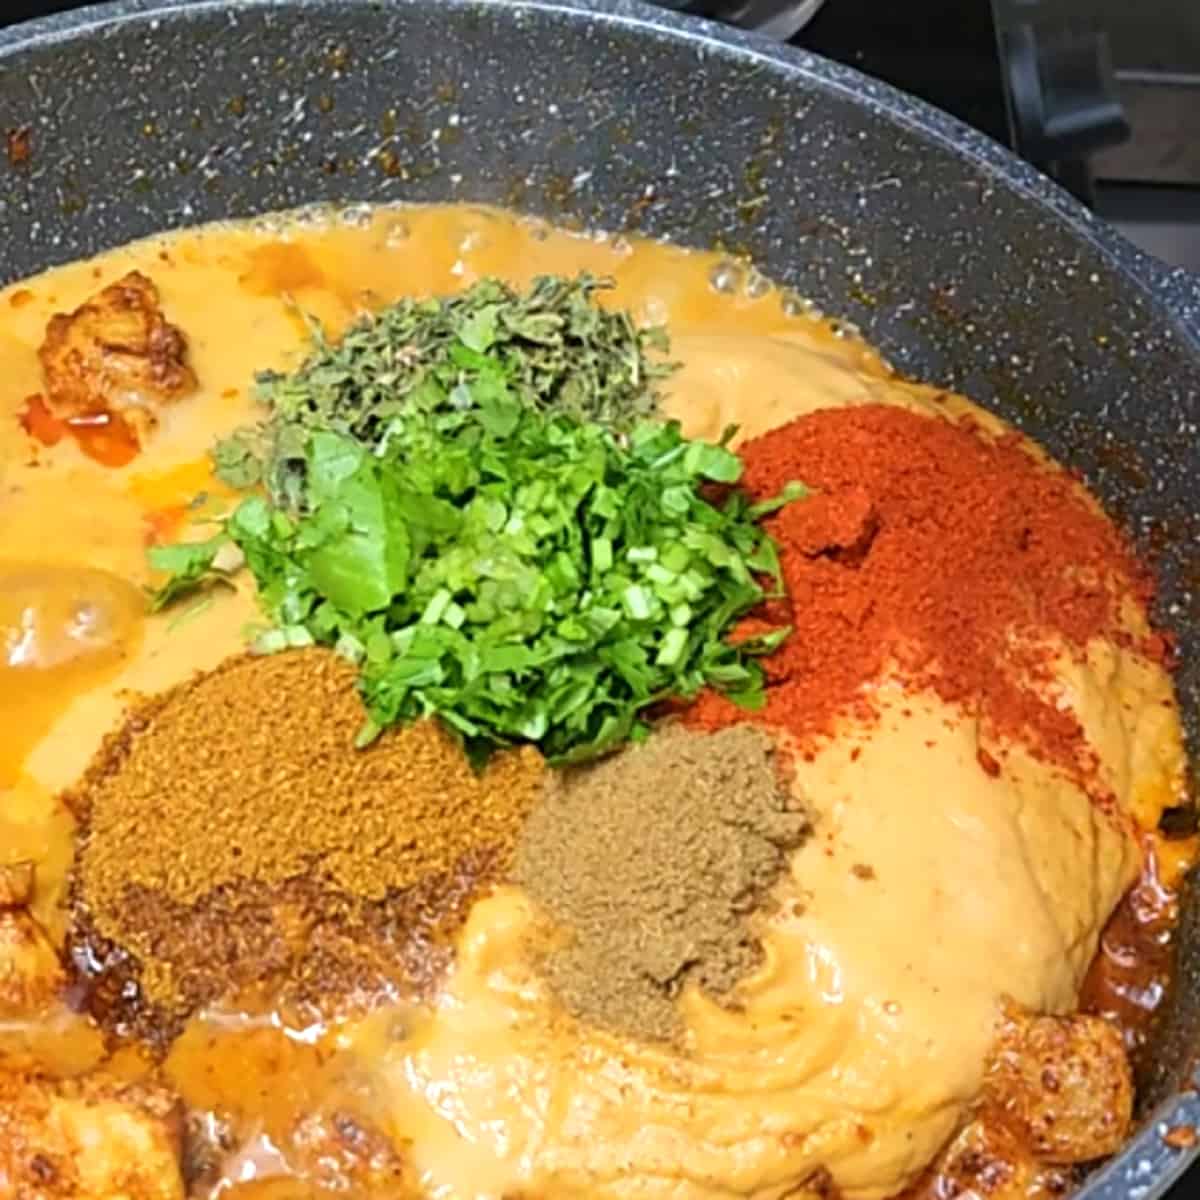 Add all the spice powders to make butter chicken sauce. 